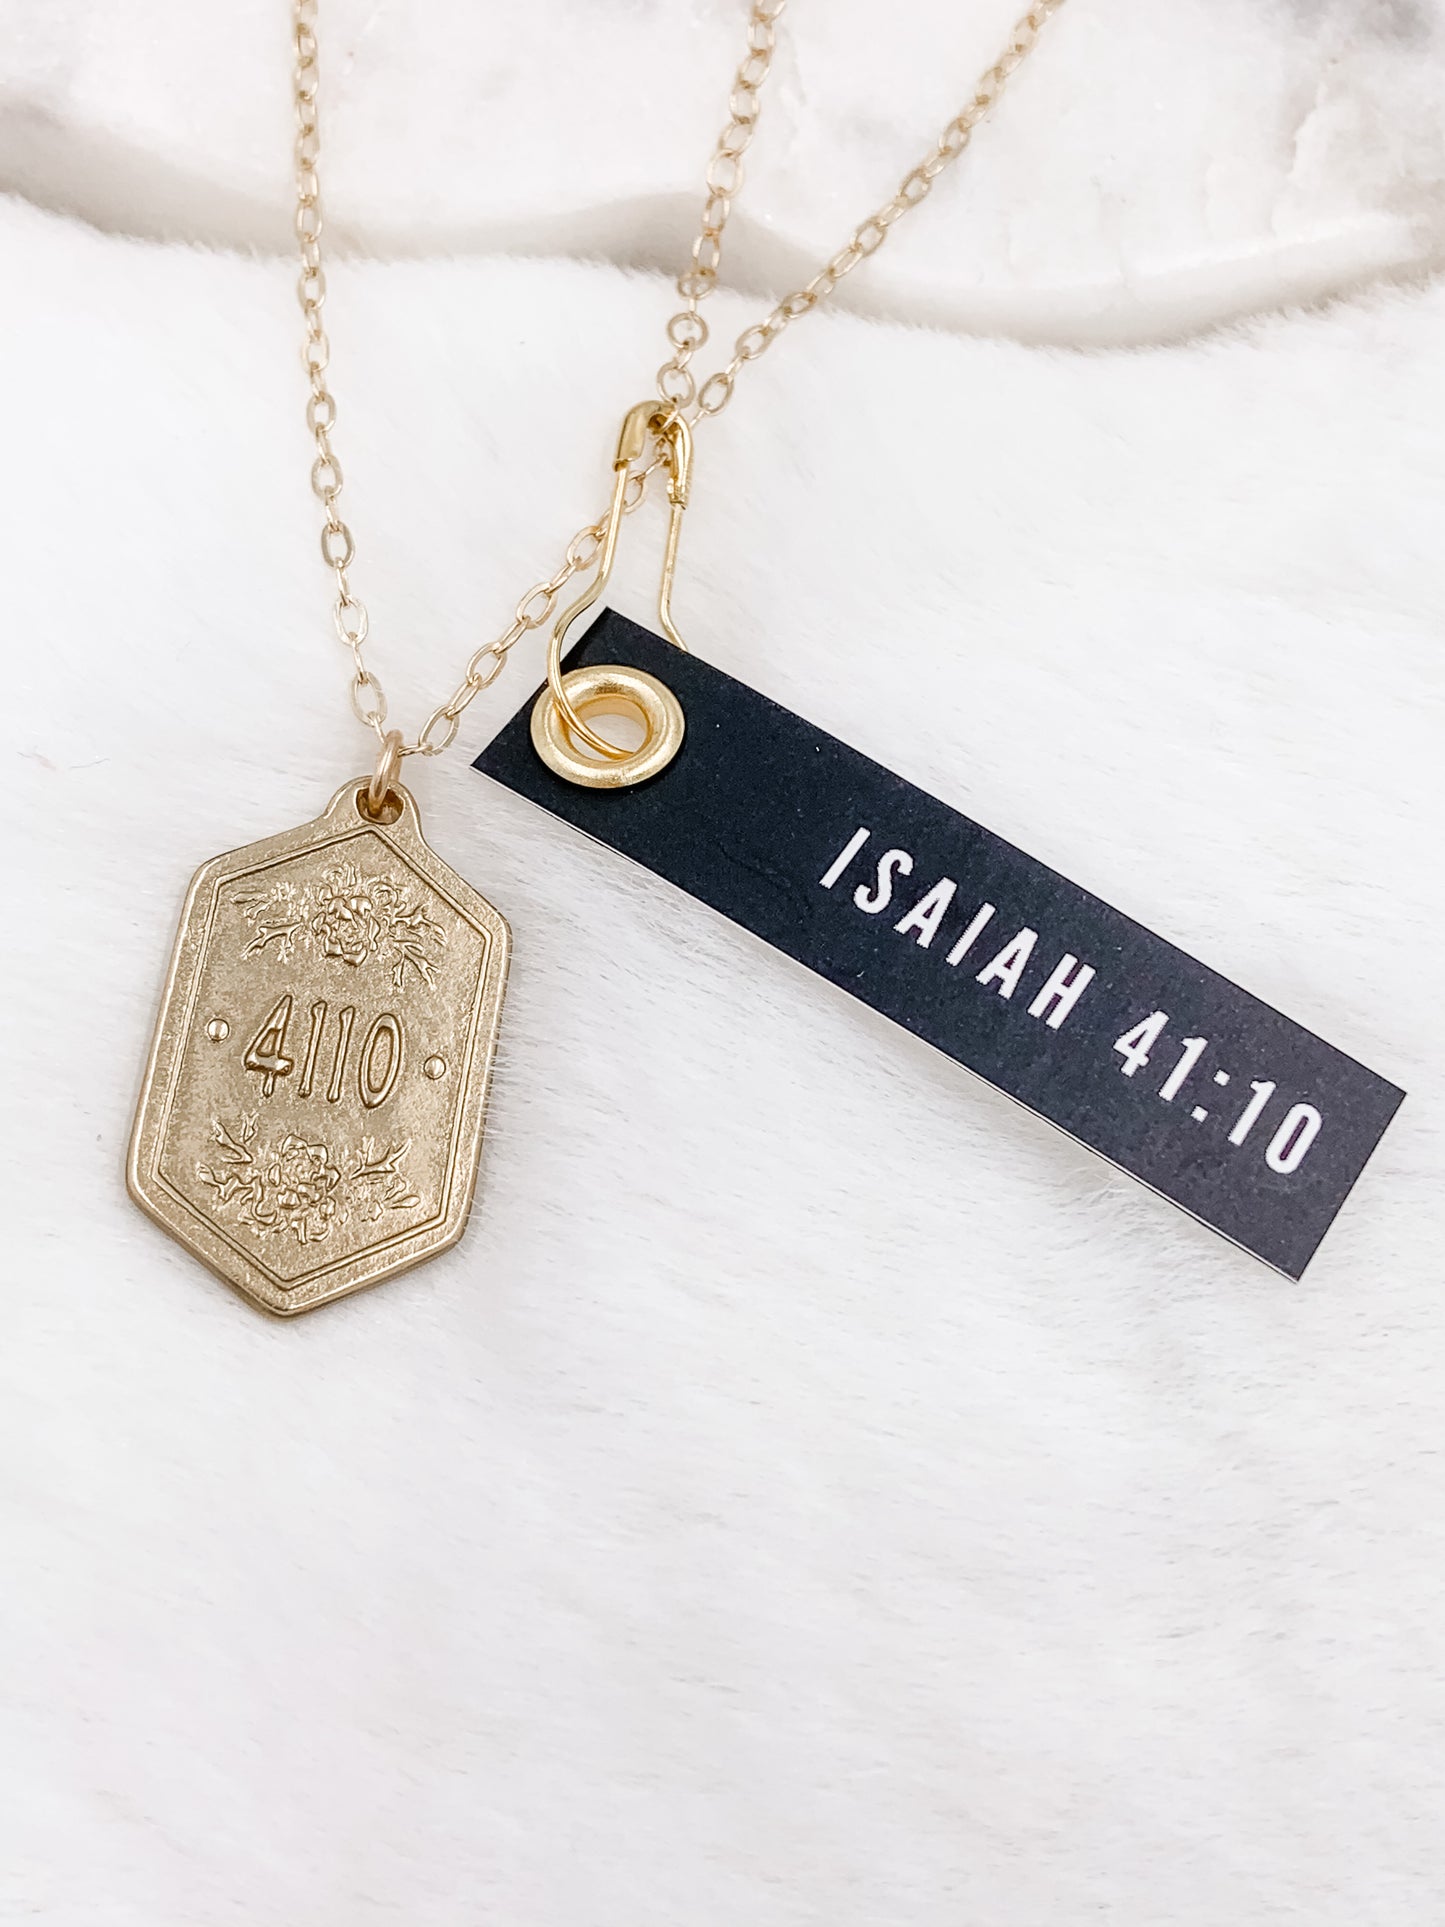 Isaiah 4110 Necklace